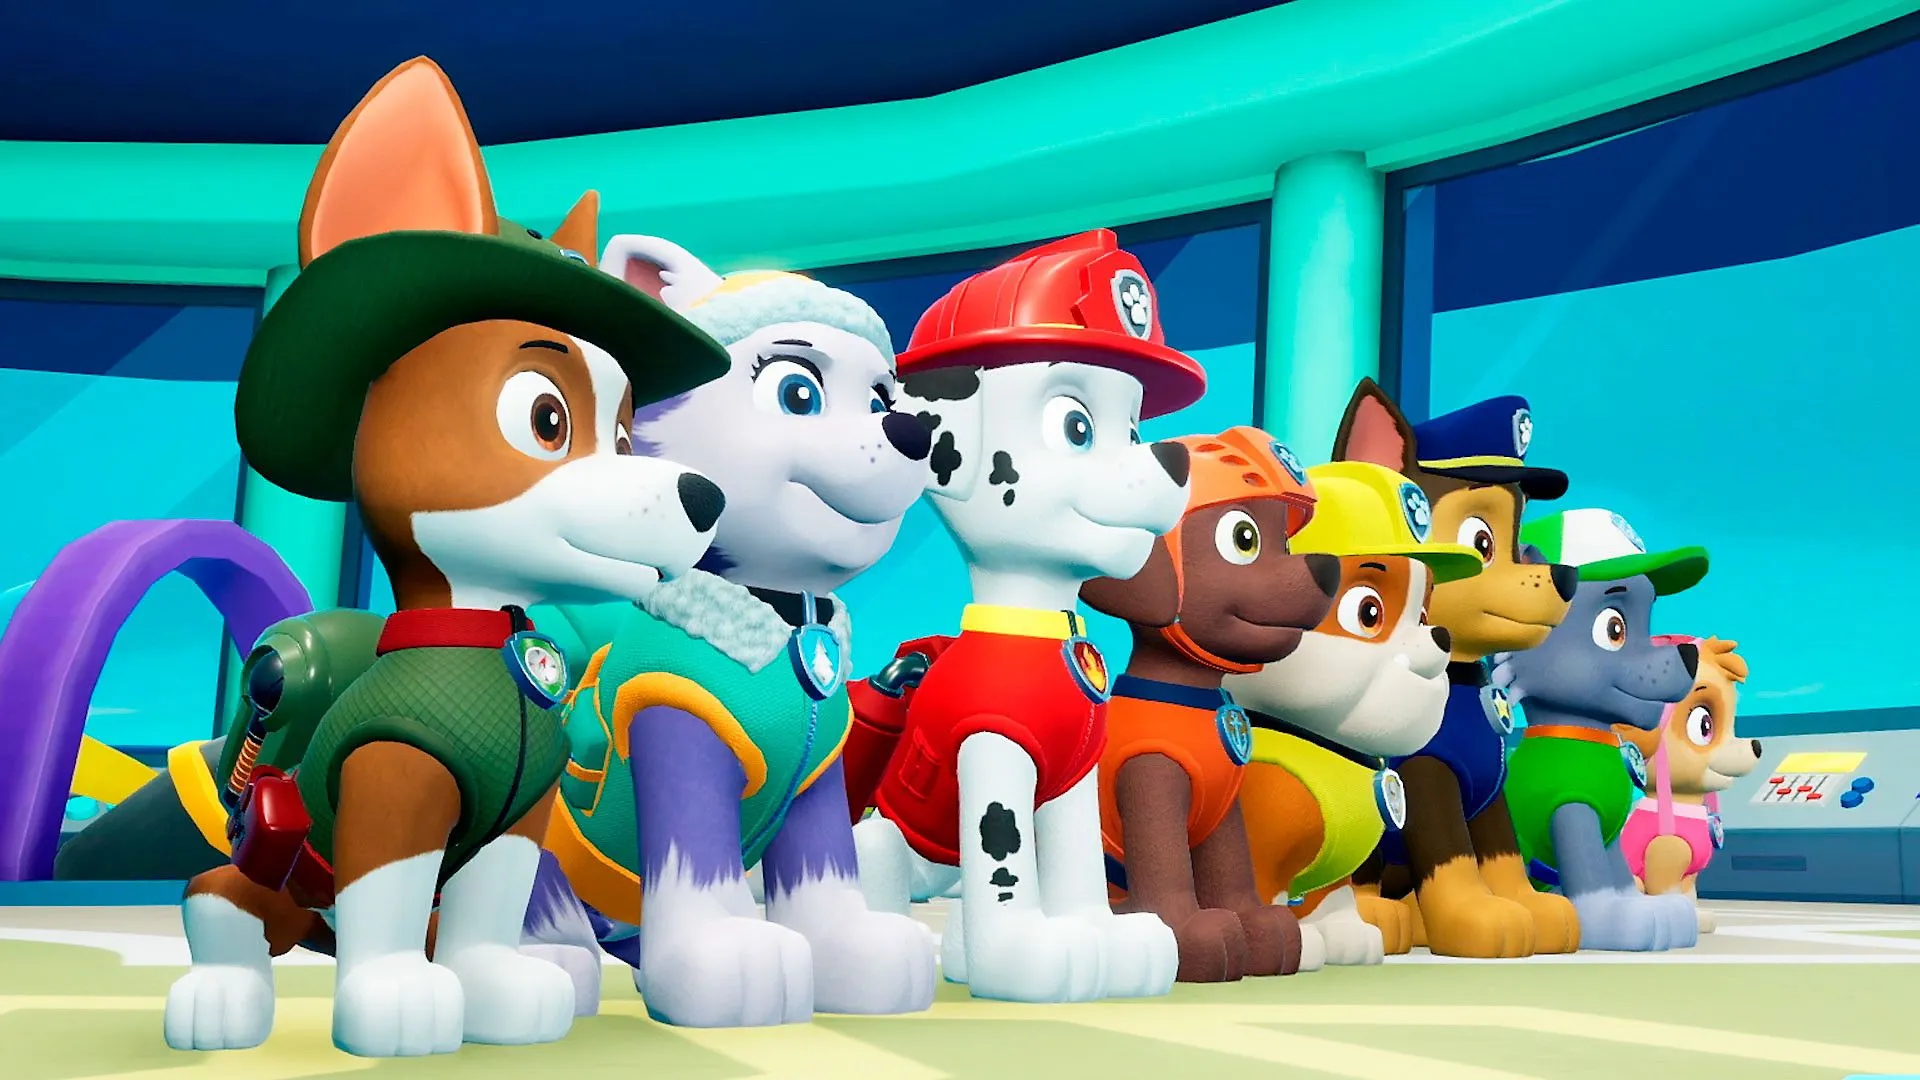 PAW Patrol is on a roll! Game | PS4 - PlayStation